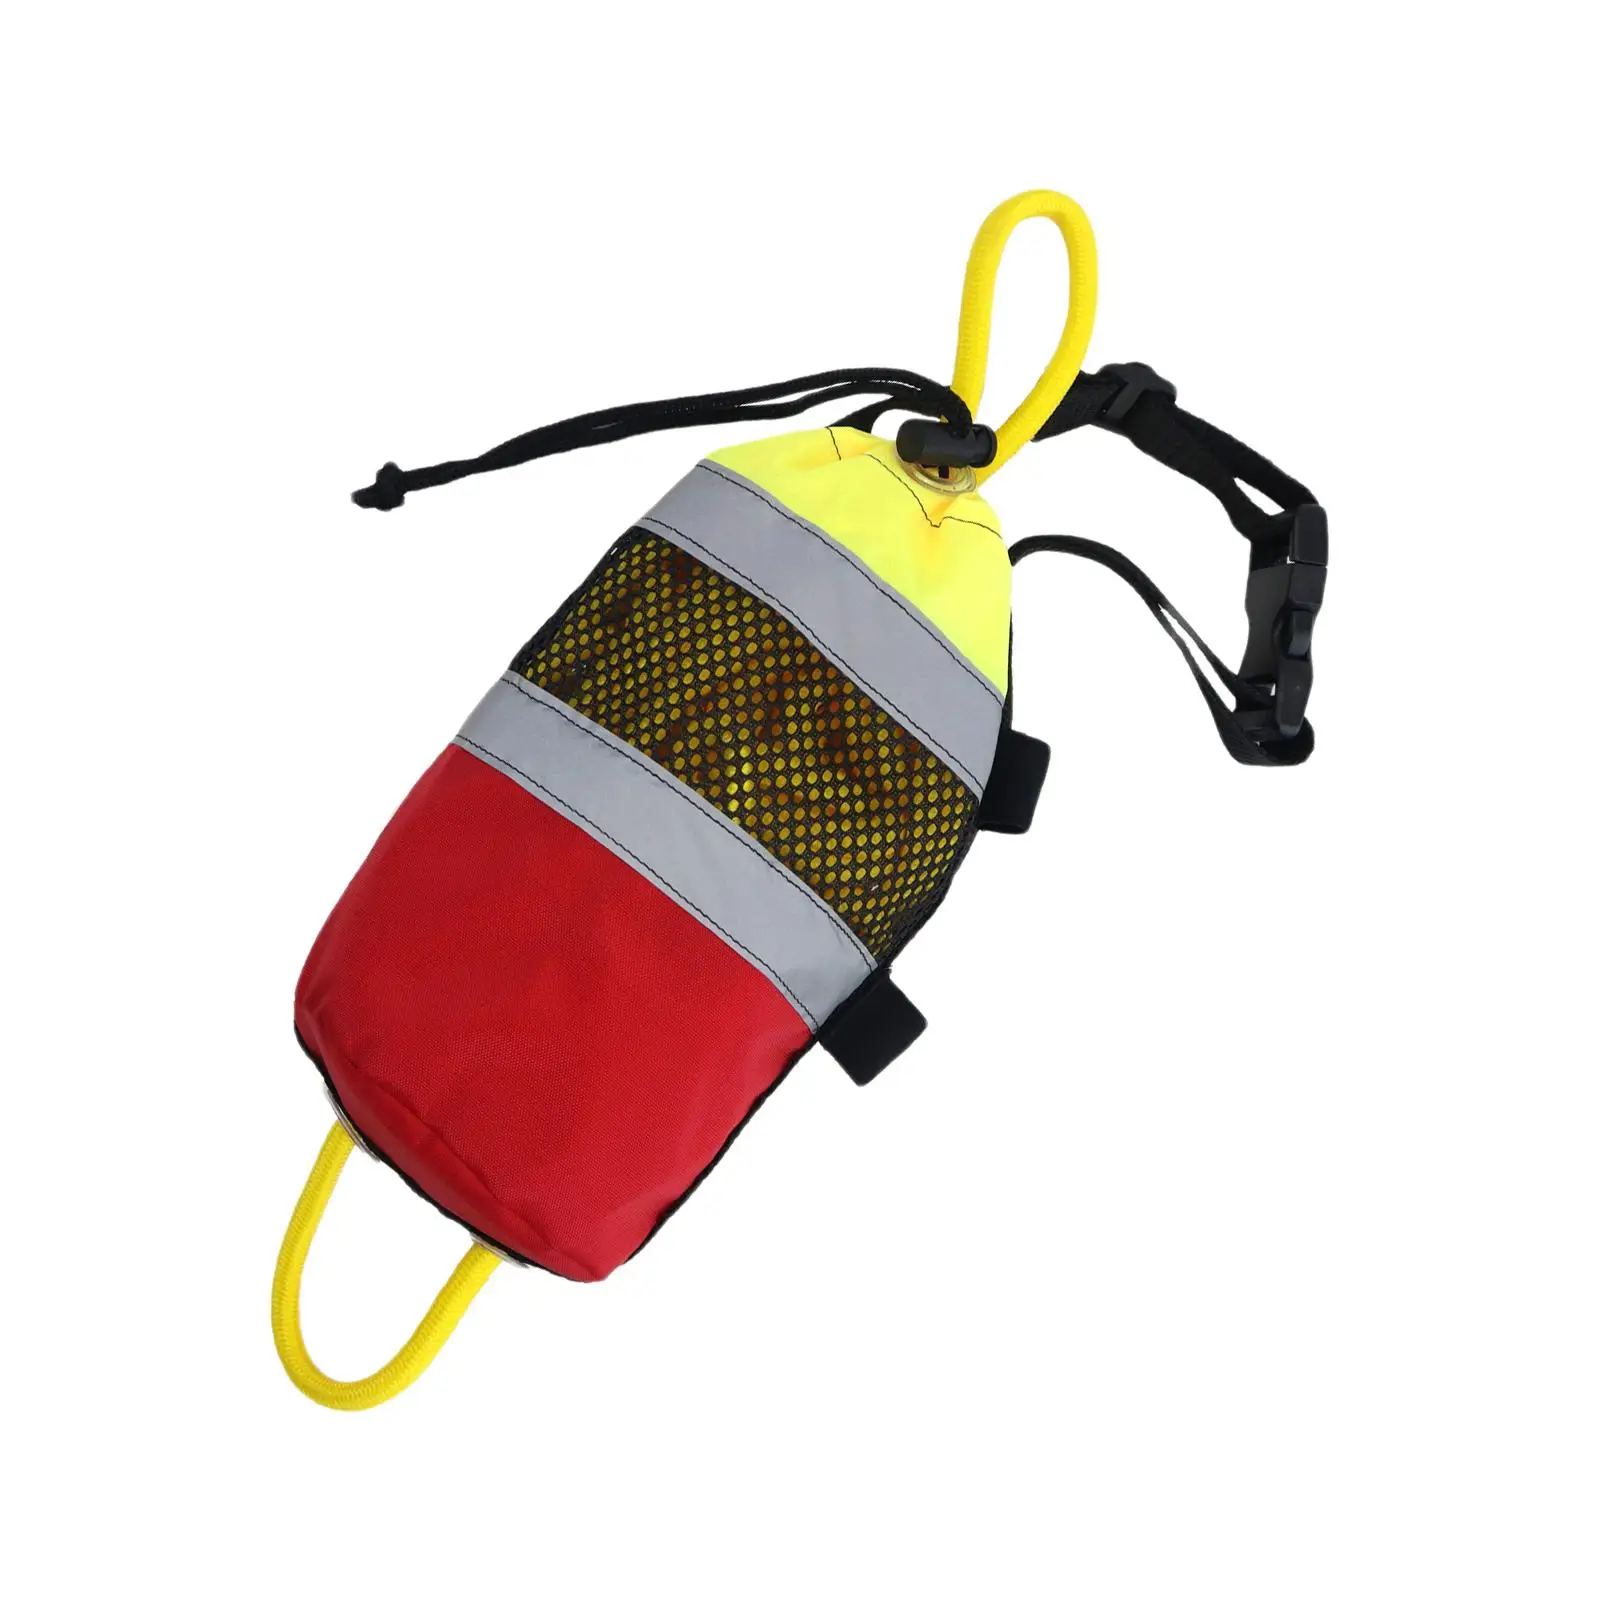 Rescue Throw Bag High Visibility Throwline Floating Throw Bag for Kayaking